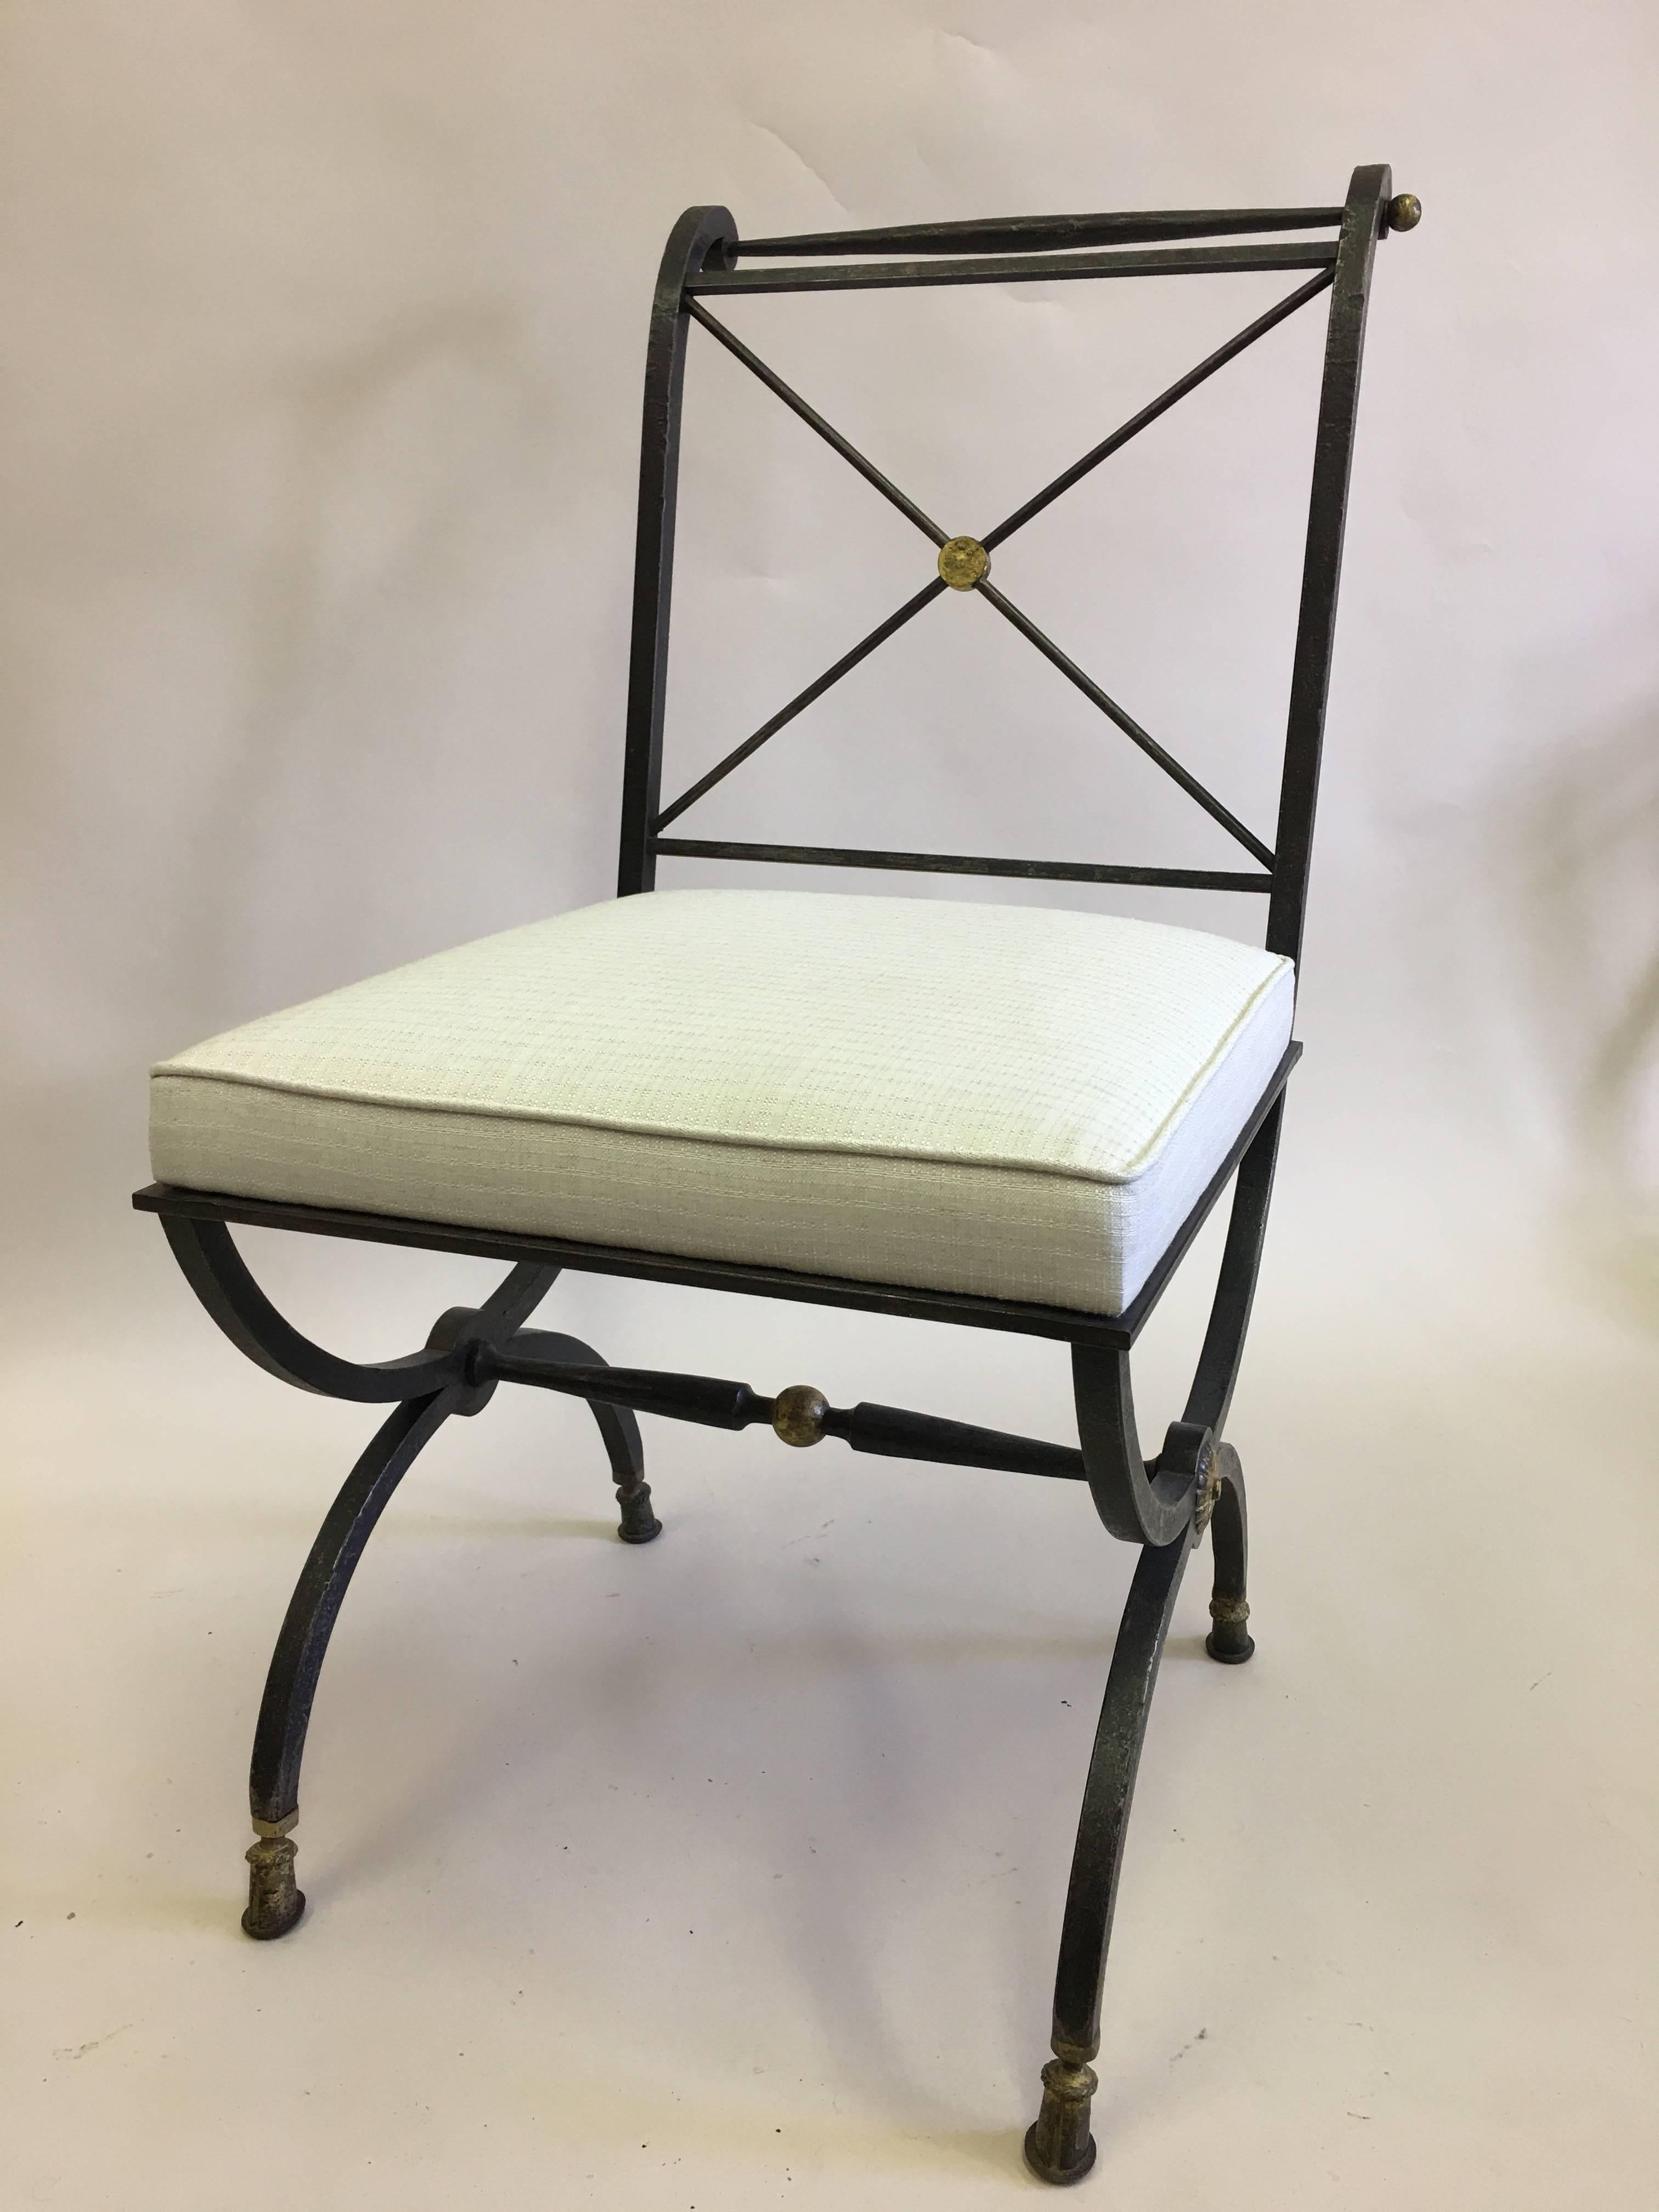 Elegant French Mid-Century Modern Neoclassical form hand-hammered wrought iron chair for desk, vanity or lounge by Gilbert Poillerat, circa 1940, with the seat structure from a design by Andre Arbus.

The chair features a Classic Curule form